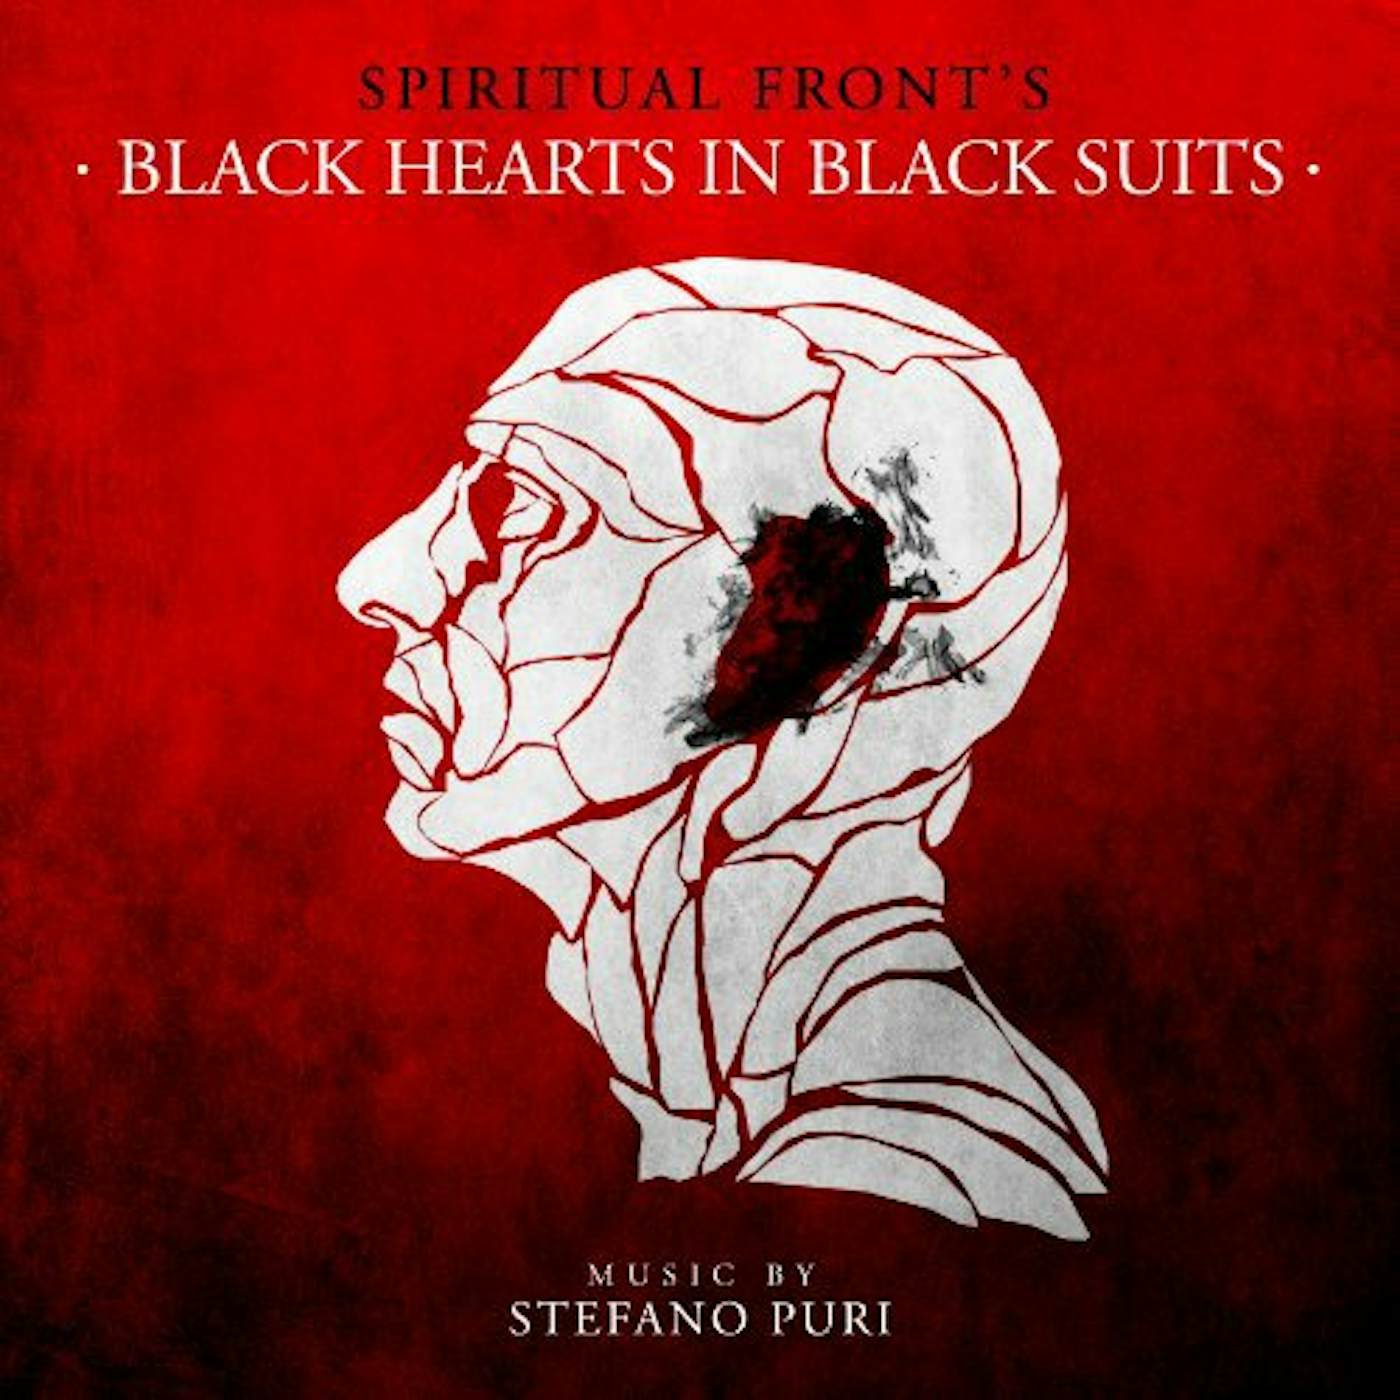 Spiritual Front BLACK HEARTS IN BLACK SUITS Vinyl Record - Limited Edition, Colored Vinyl